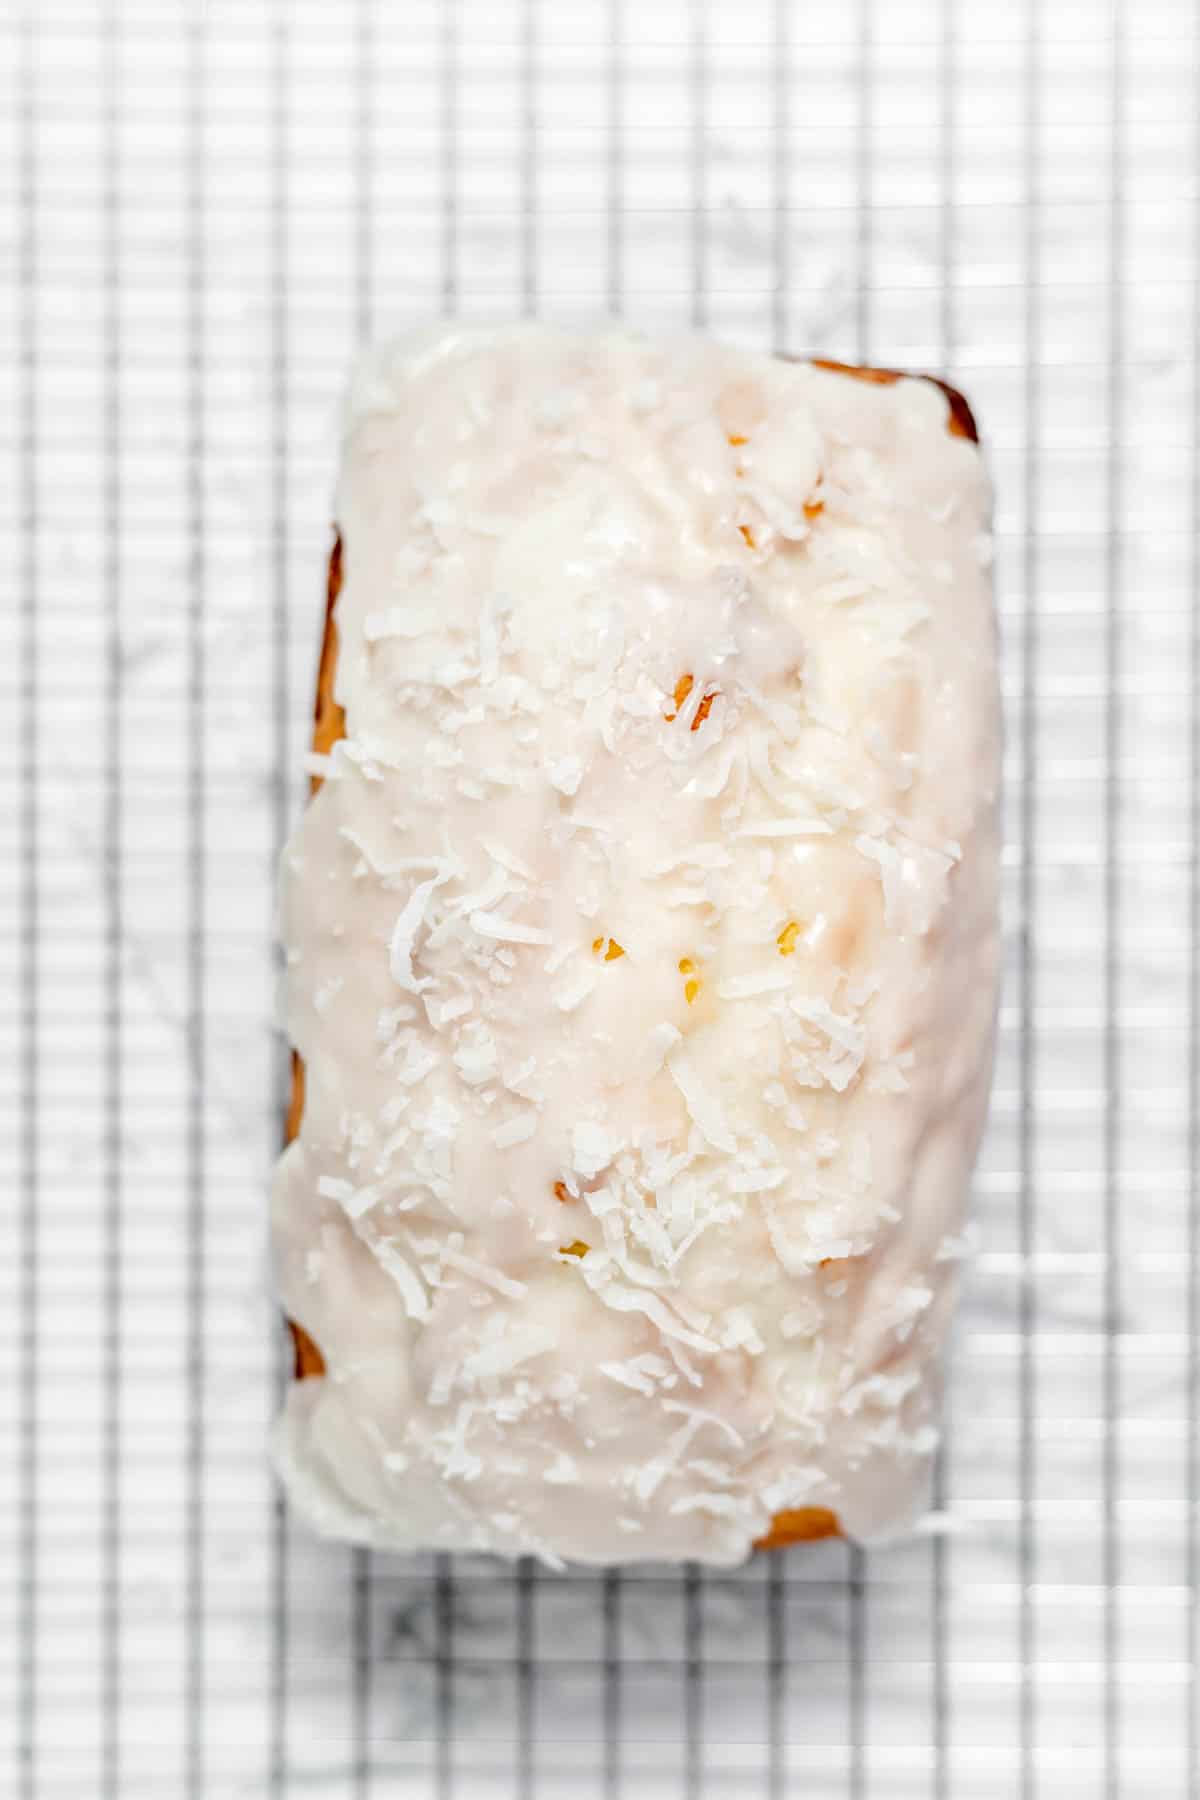 Top view of a baked Coconut bread loaf on a wire rack with a white glaze on top. 